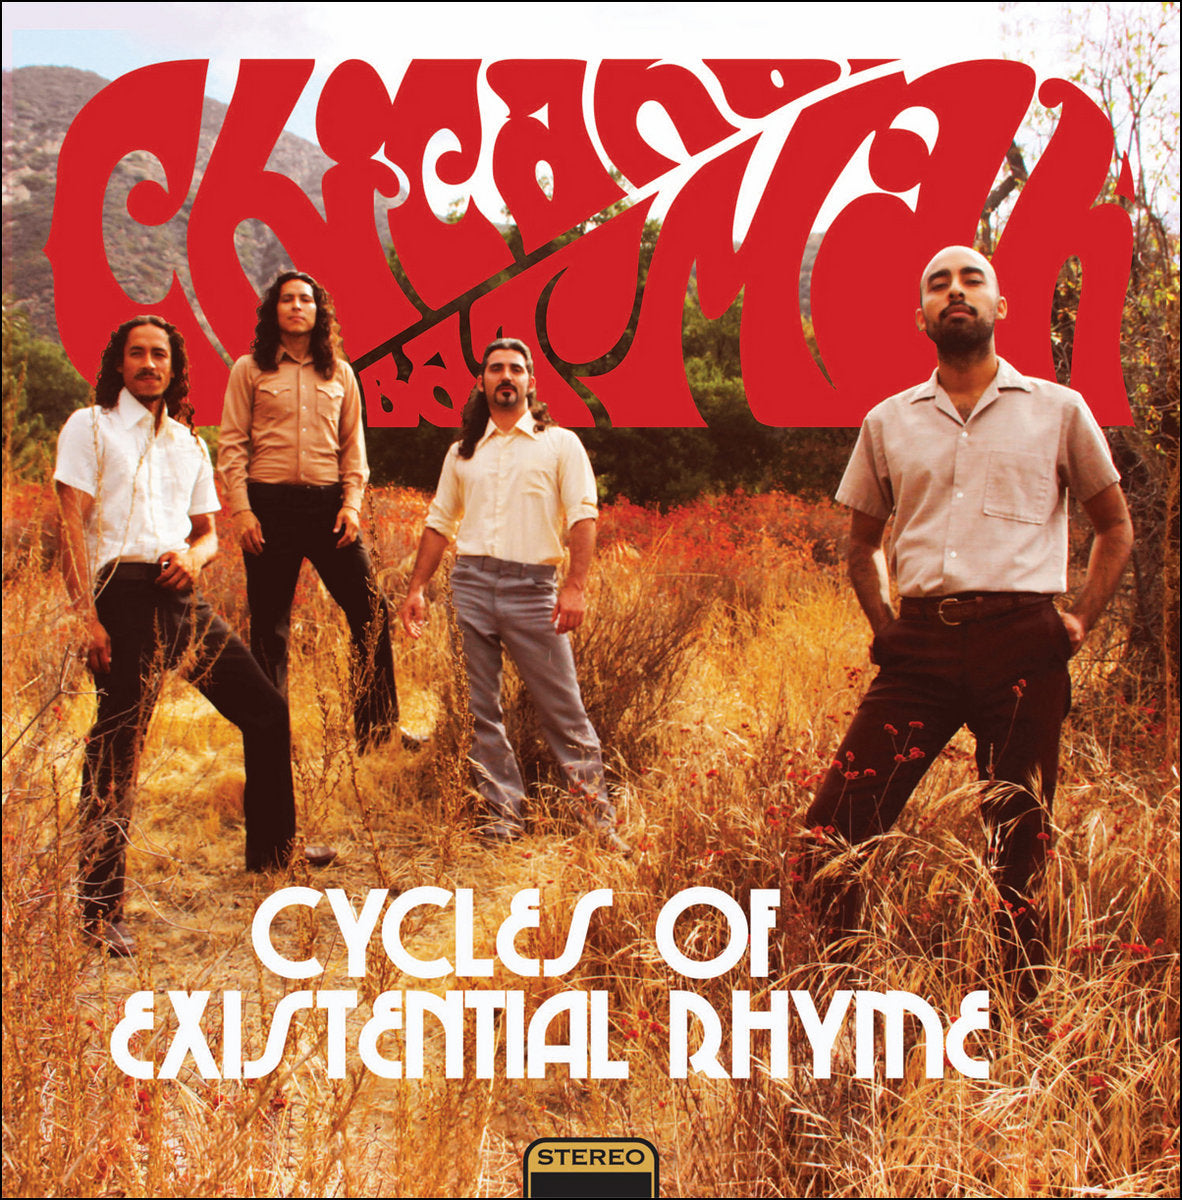 CHICANO BATMAN - CYCLES OF EXISTENTIAL RHYME Vinyl LP